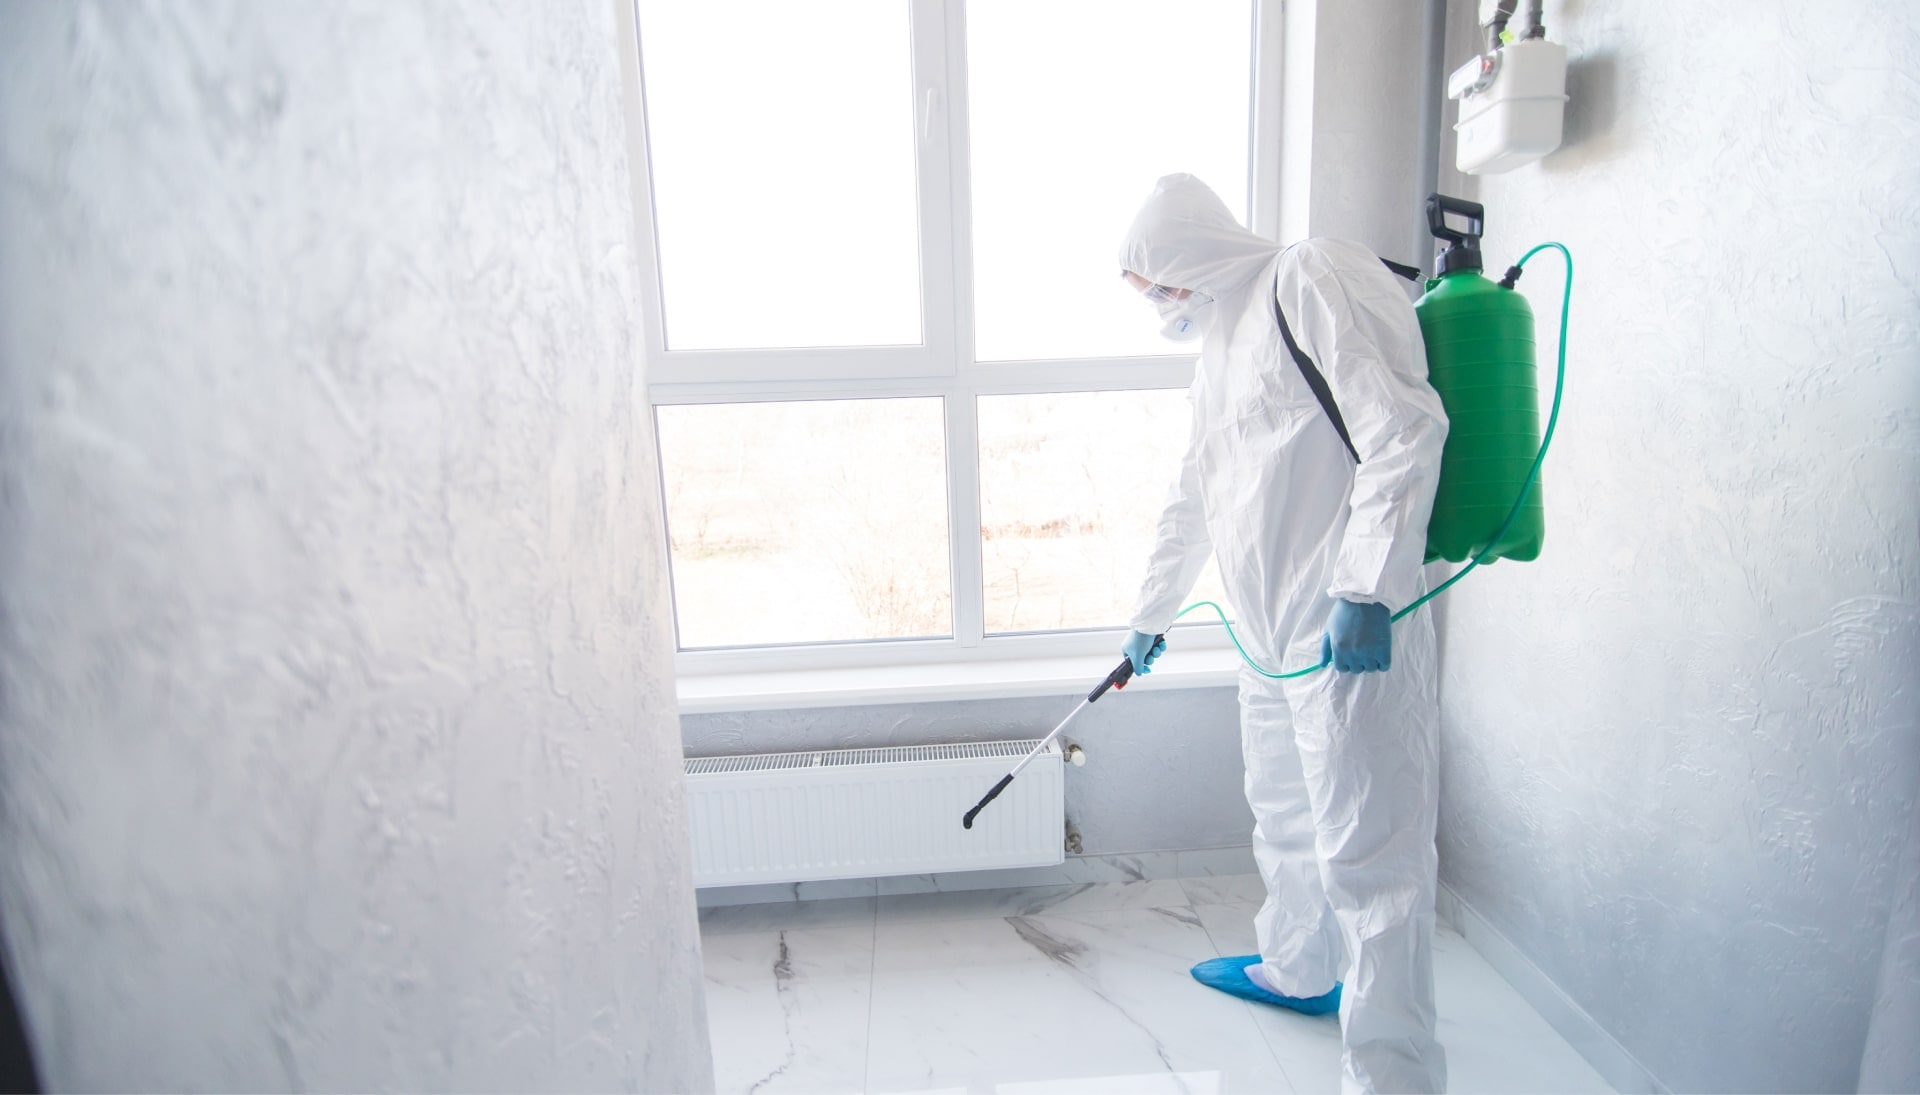 We provide the highest-quality mold inspection, testing, and removal services in the San Francisco, California area.